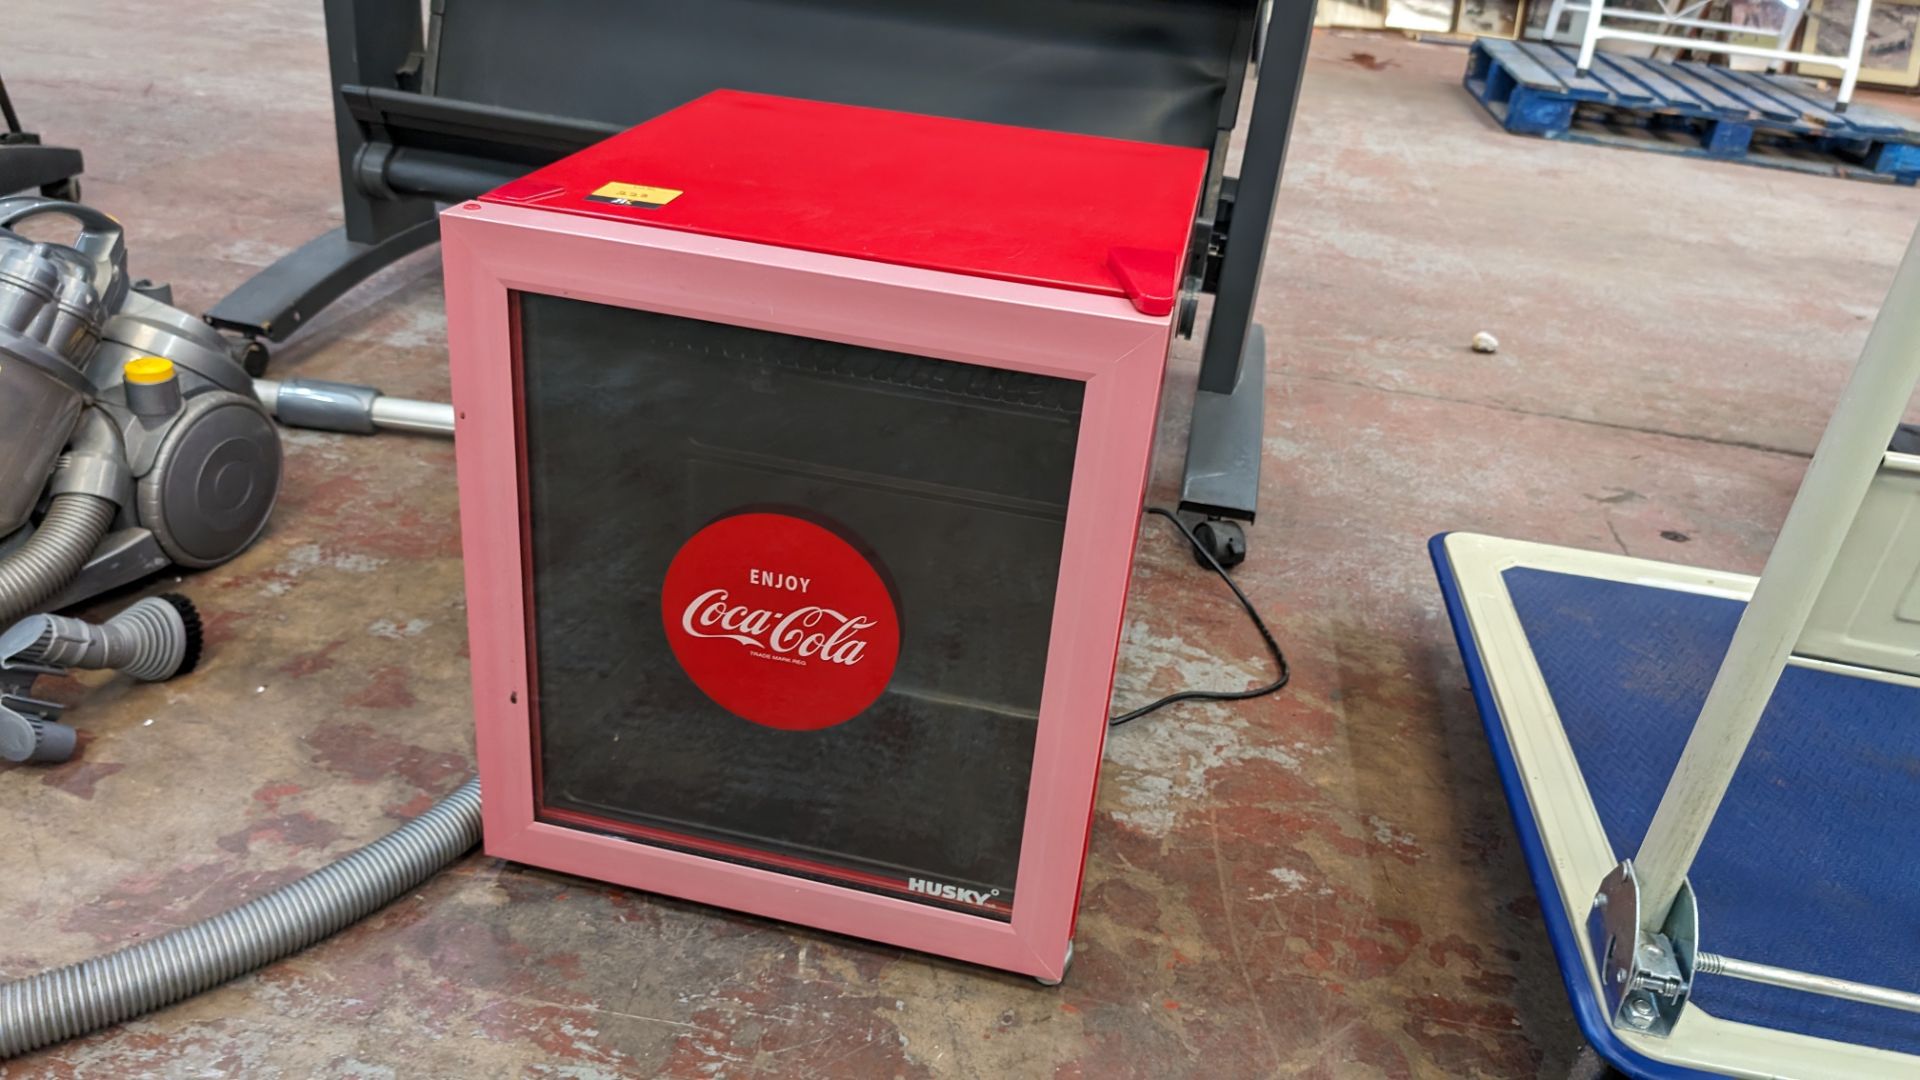 Husky clear front drinks fridge with Coca Cola branding - Image 2 of 6